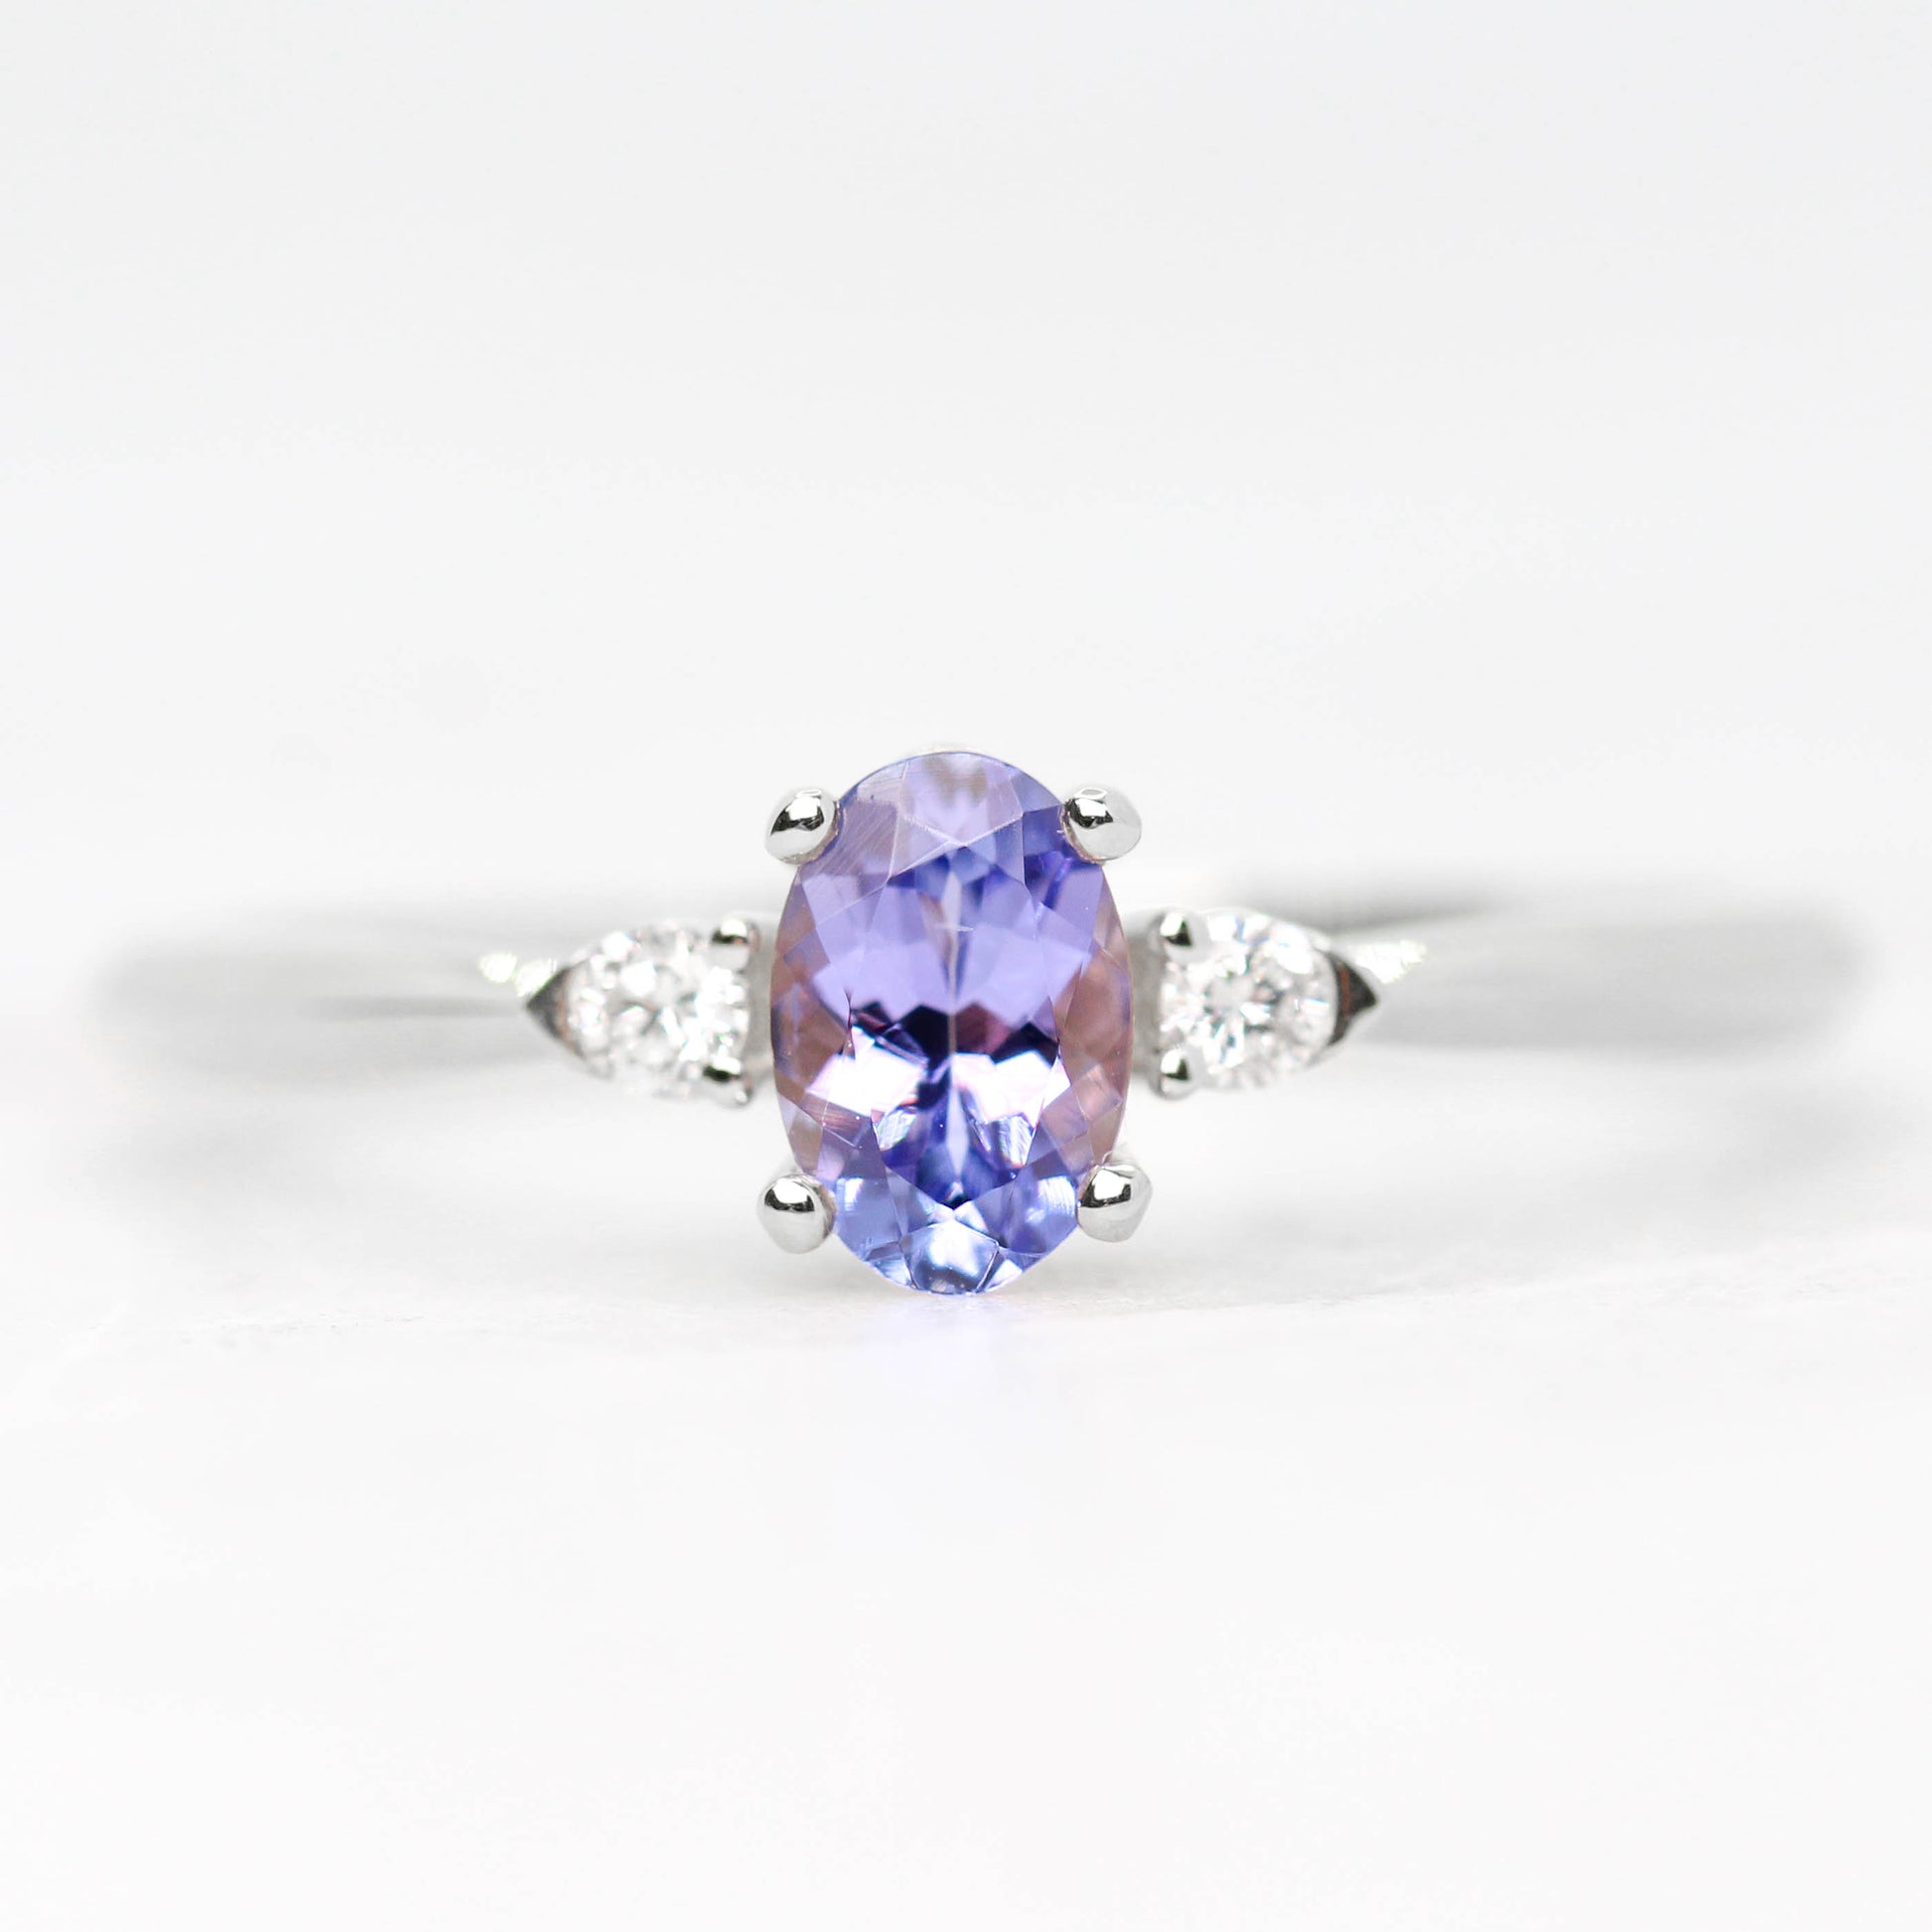 Chelsea Ring with an Oval Tanzanite and White Accent Diamonds in 14k Yellow Gold - Made to Order, Choose Your Gold Tone - Midwinter Co. Alternative Bridal Rings and Modern Fine Jewelry